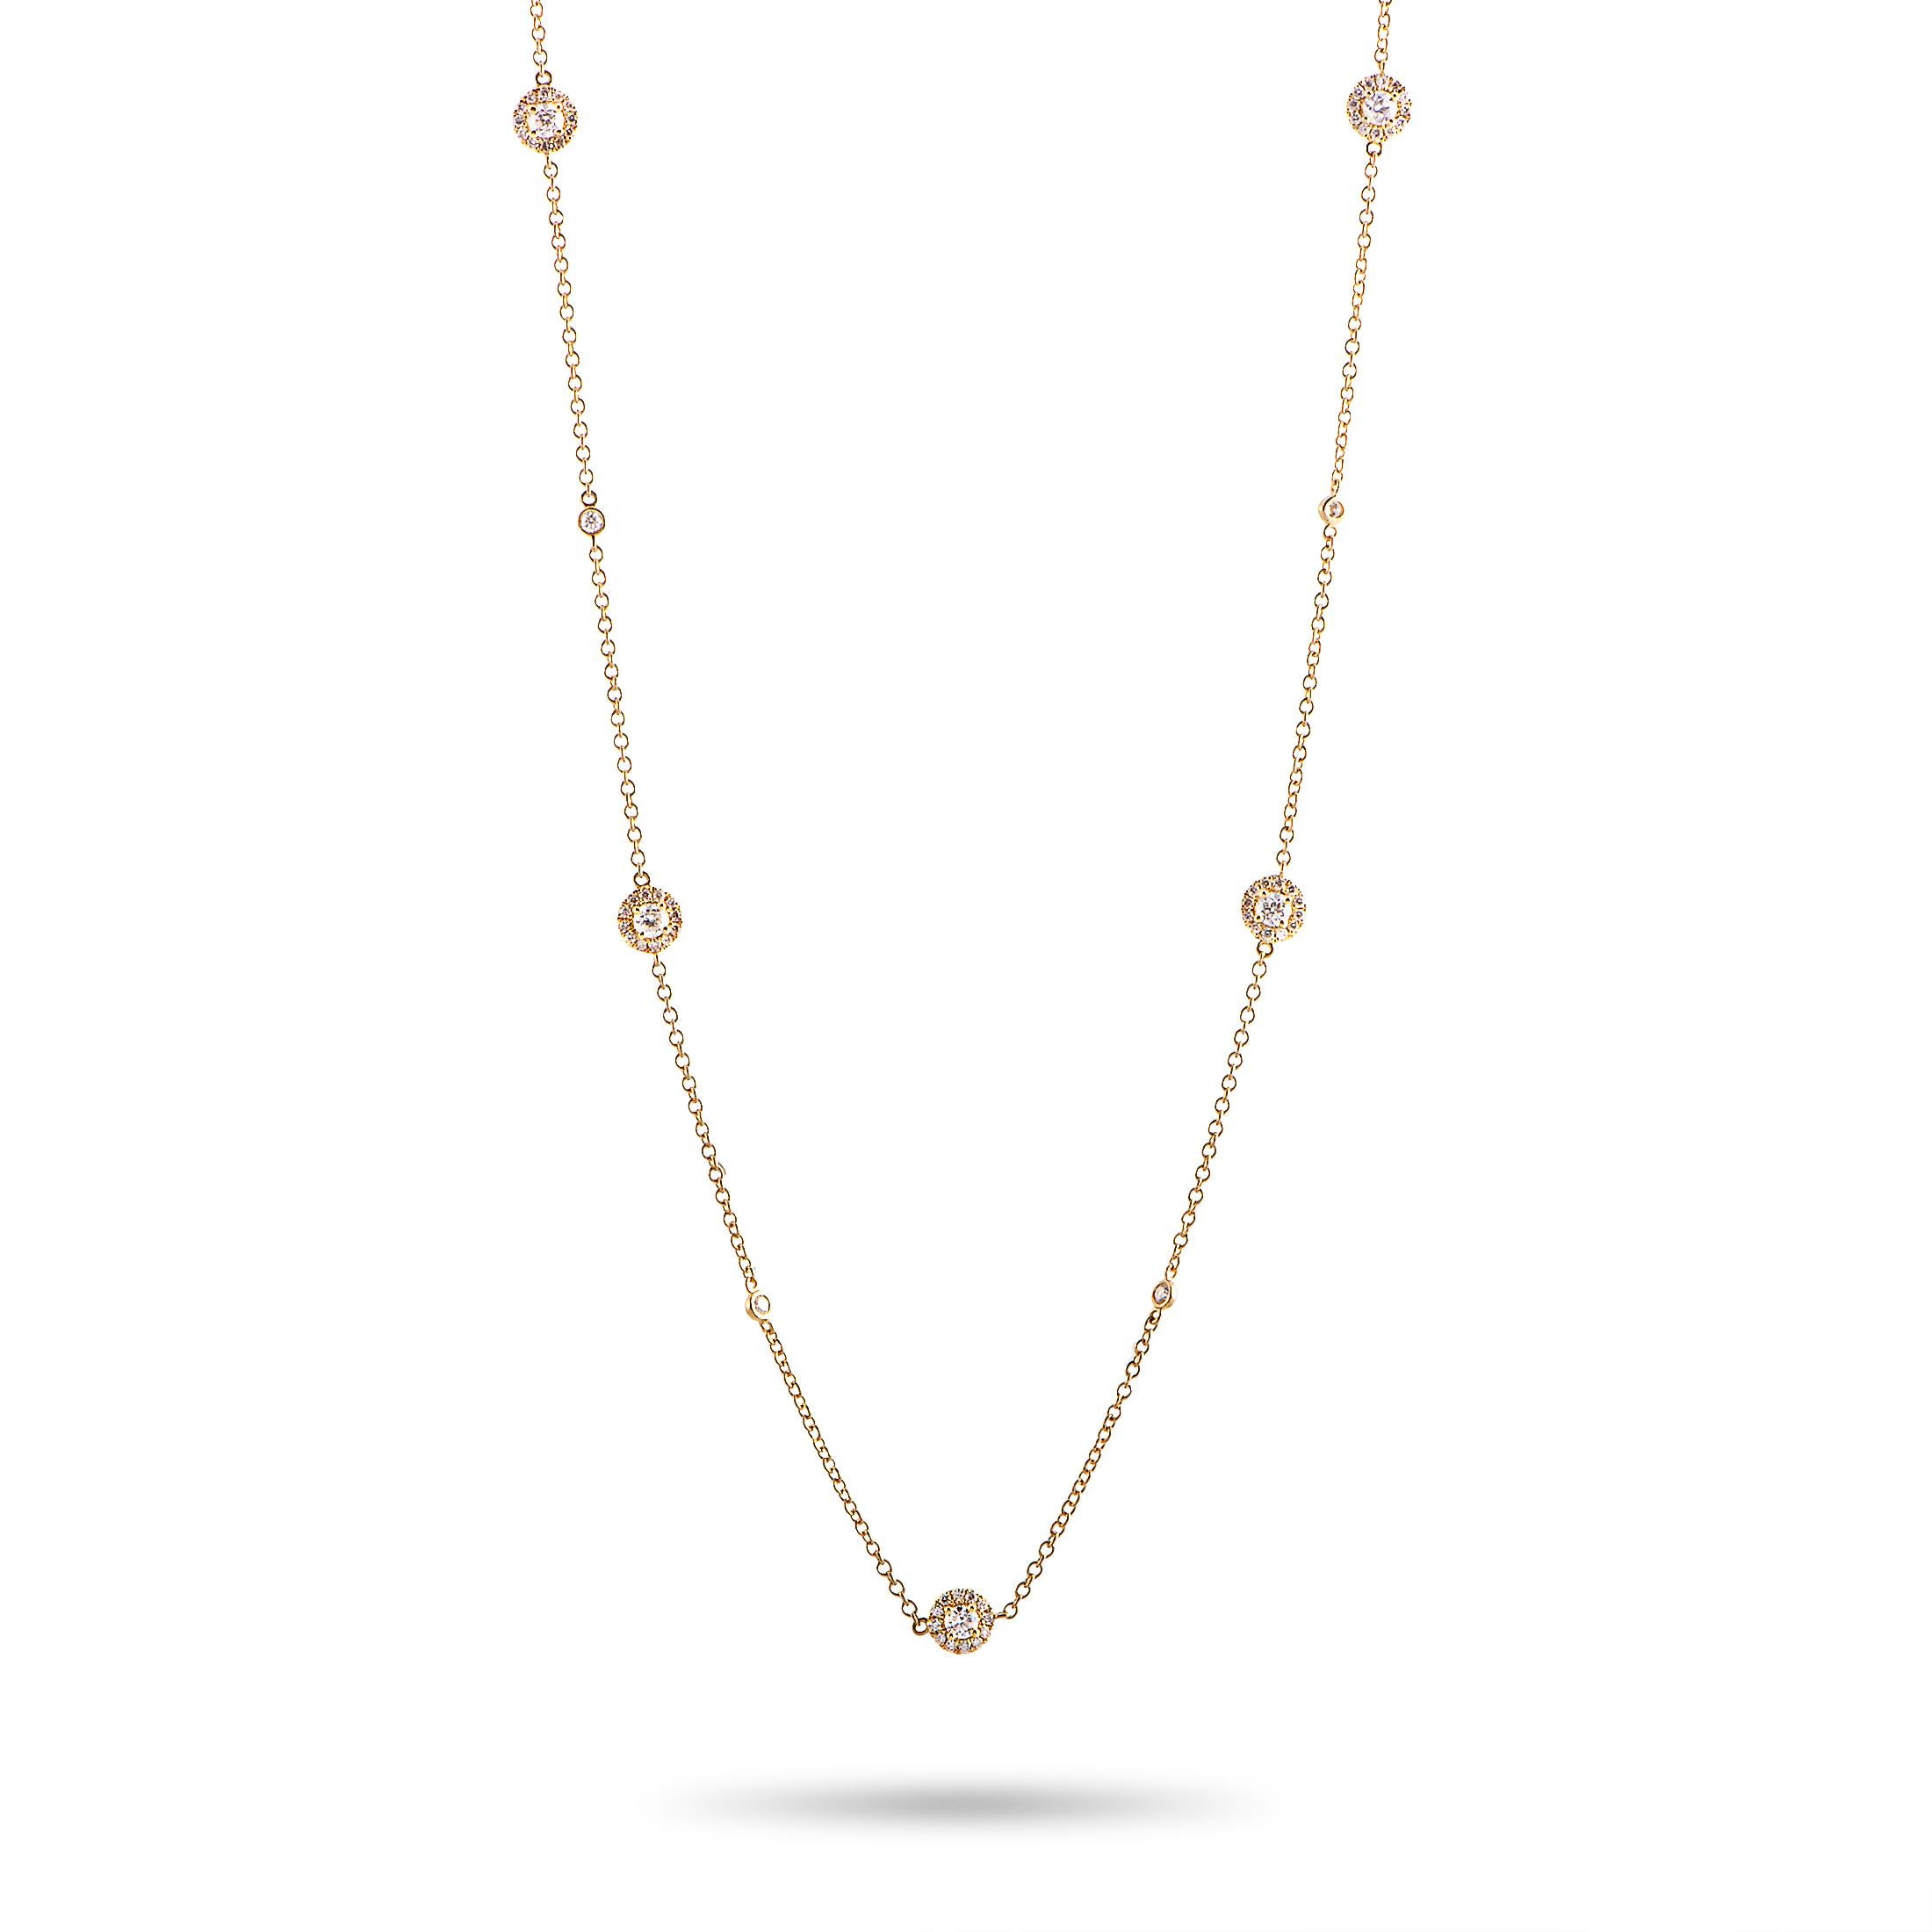 This LB Exclusive necklace is crafted from 18K yellow gold and weighs 9.2 grams, measuring 40” in length. The necklace is set with diamonds that weigh 3.01 carats in total.

Offered in brand new condition, this jewelry piece includes a gift box.
